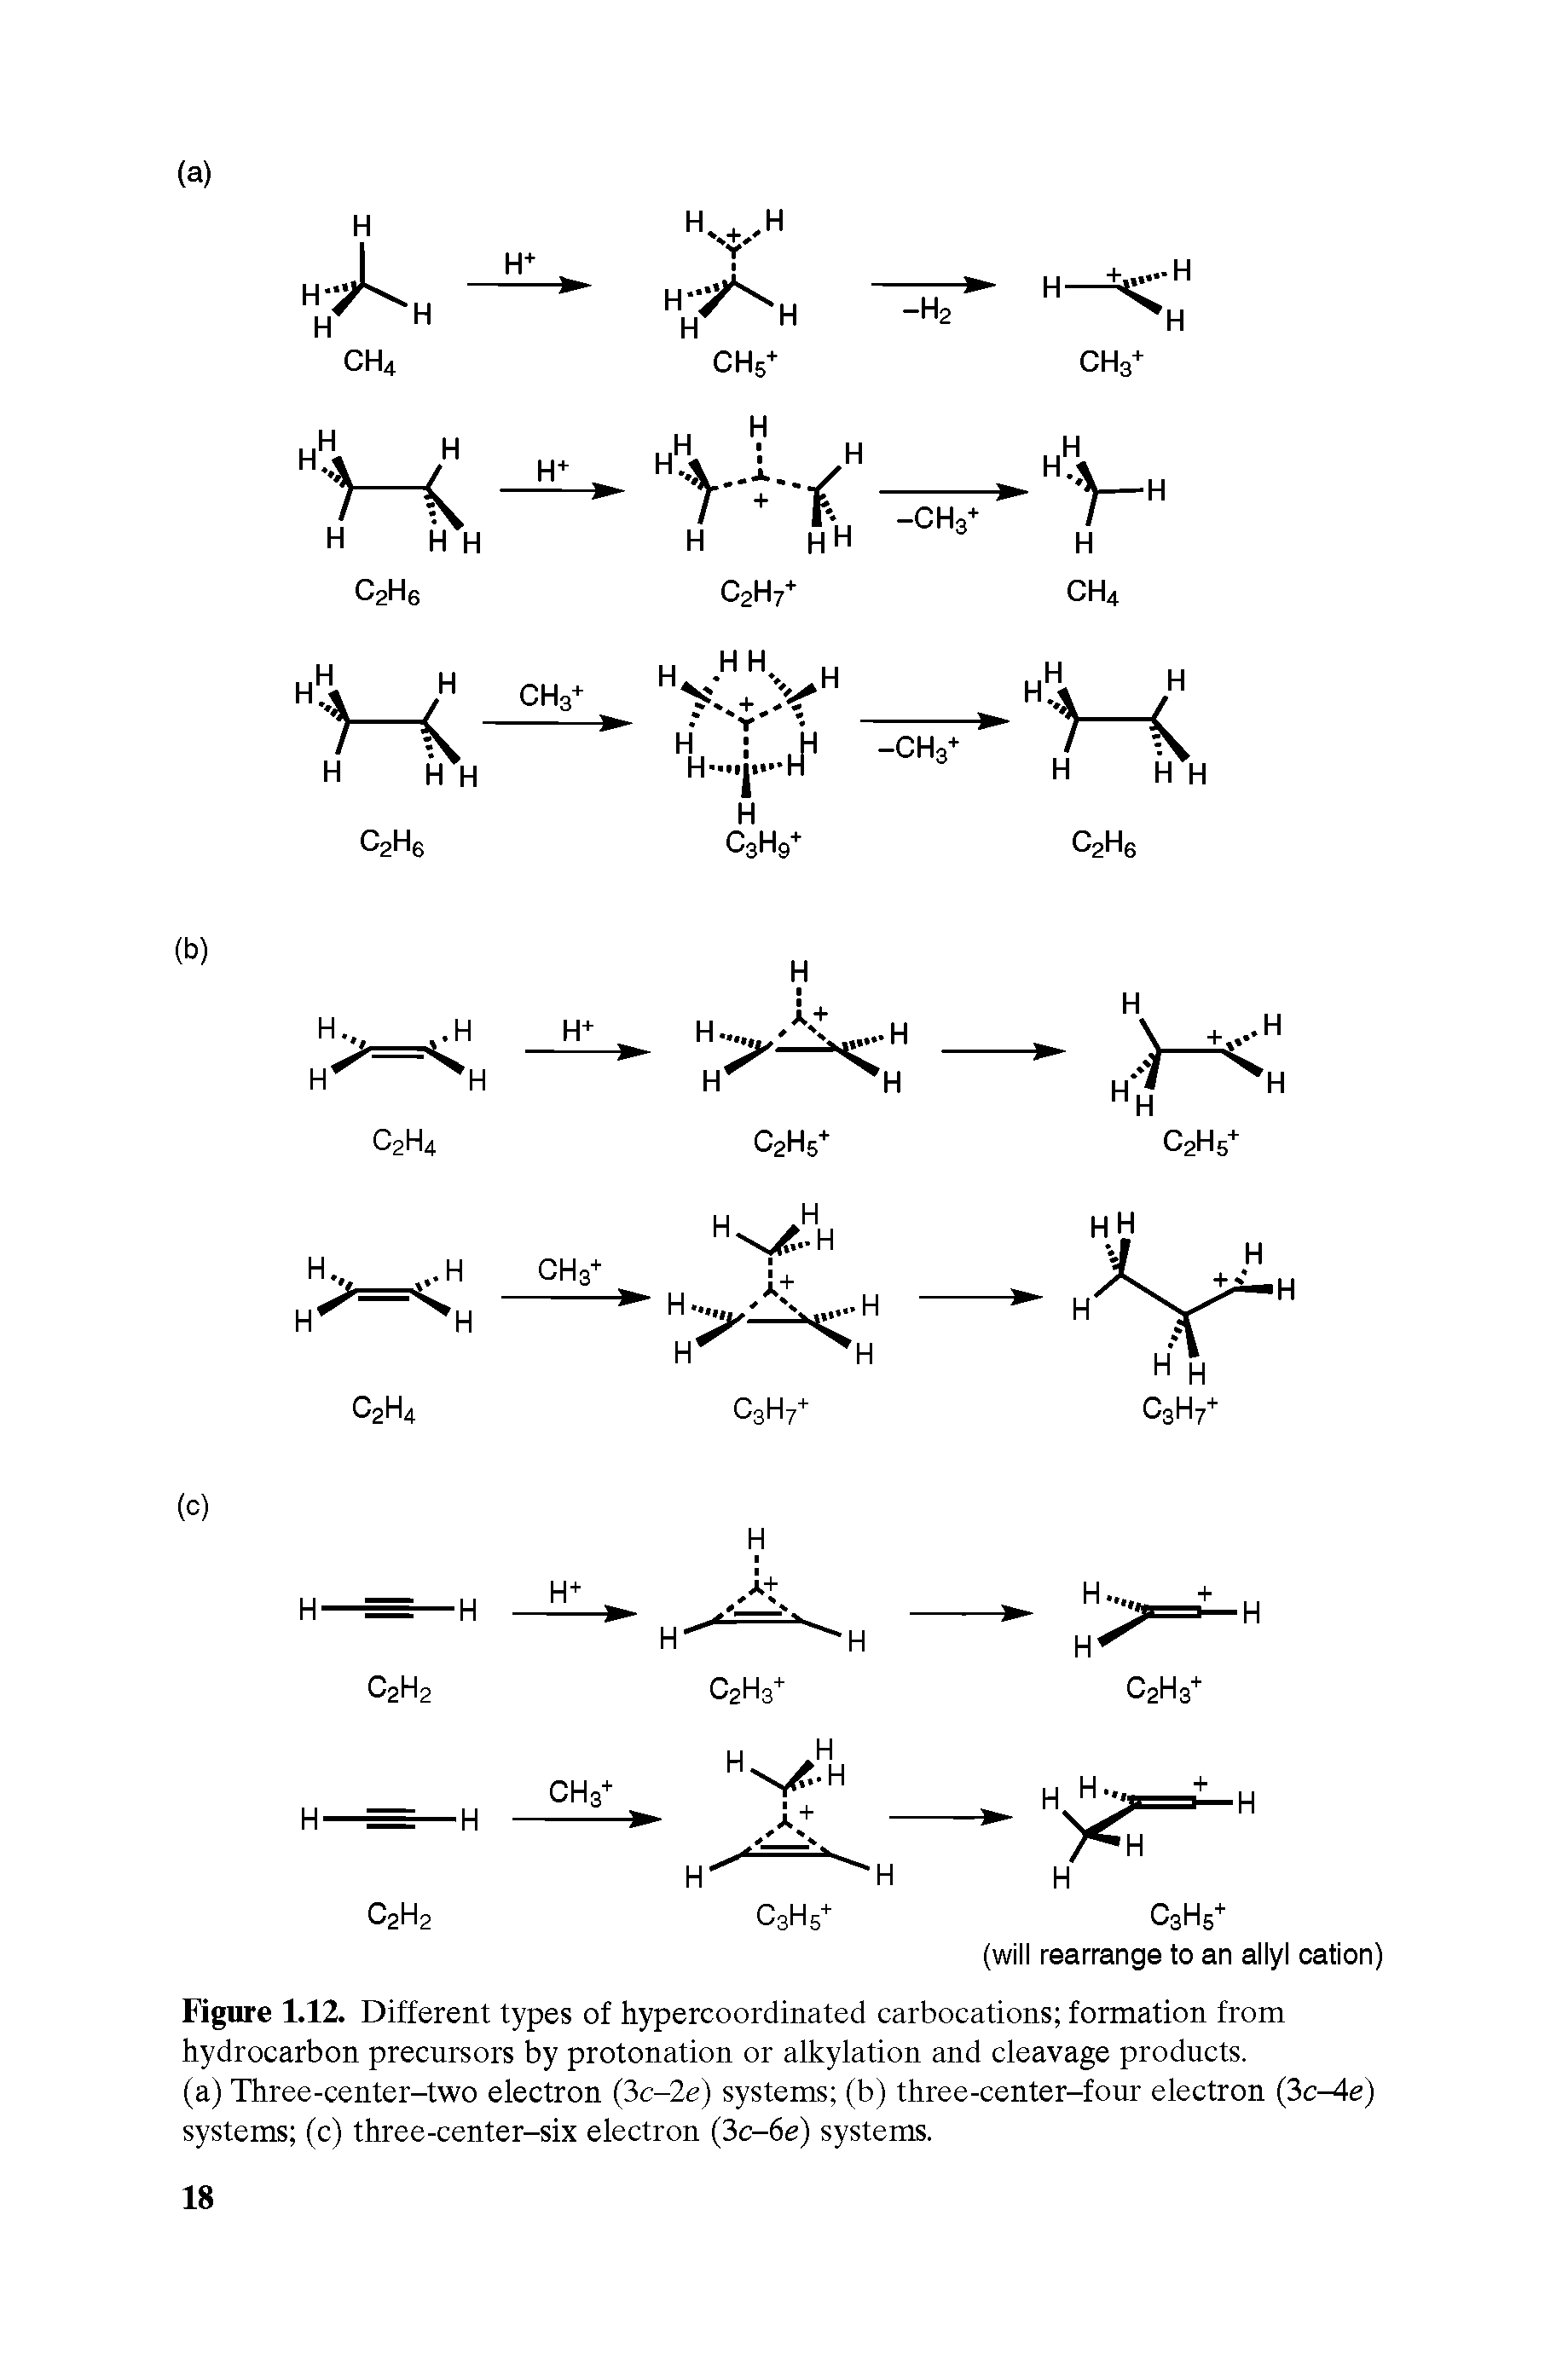 Figure 1.12. Different types of hypercoordinated carbocations formation from hydrocarbon precursors by protonation or alkylation and cleavage products.